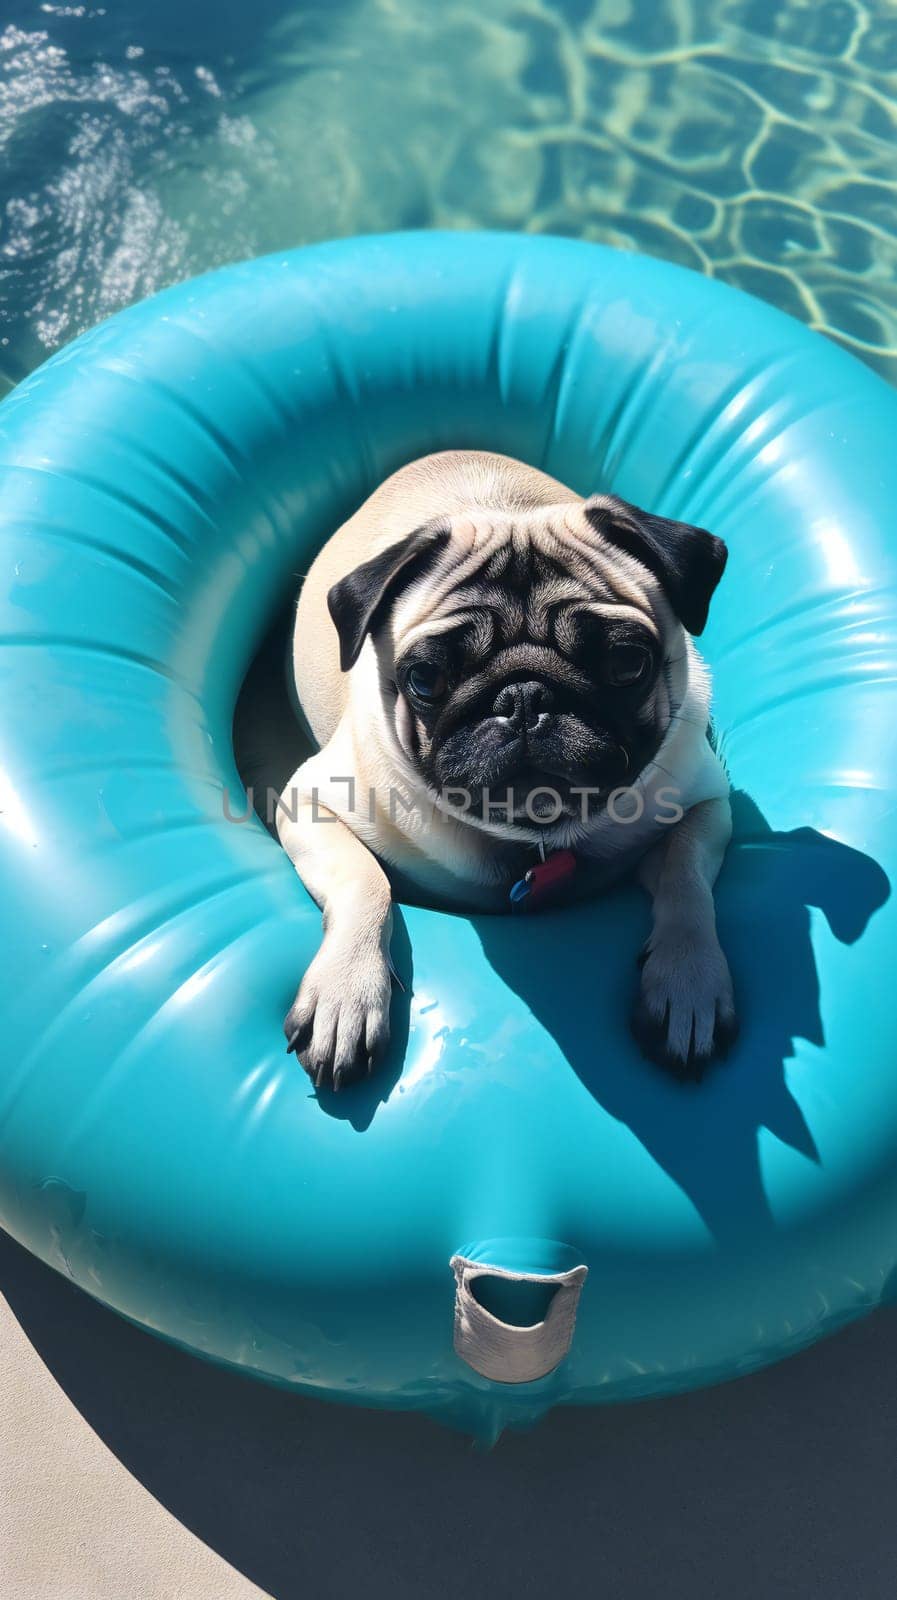 The pug dog is floating on an inflatable ring in swimming pool.